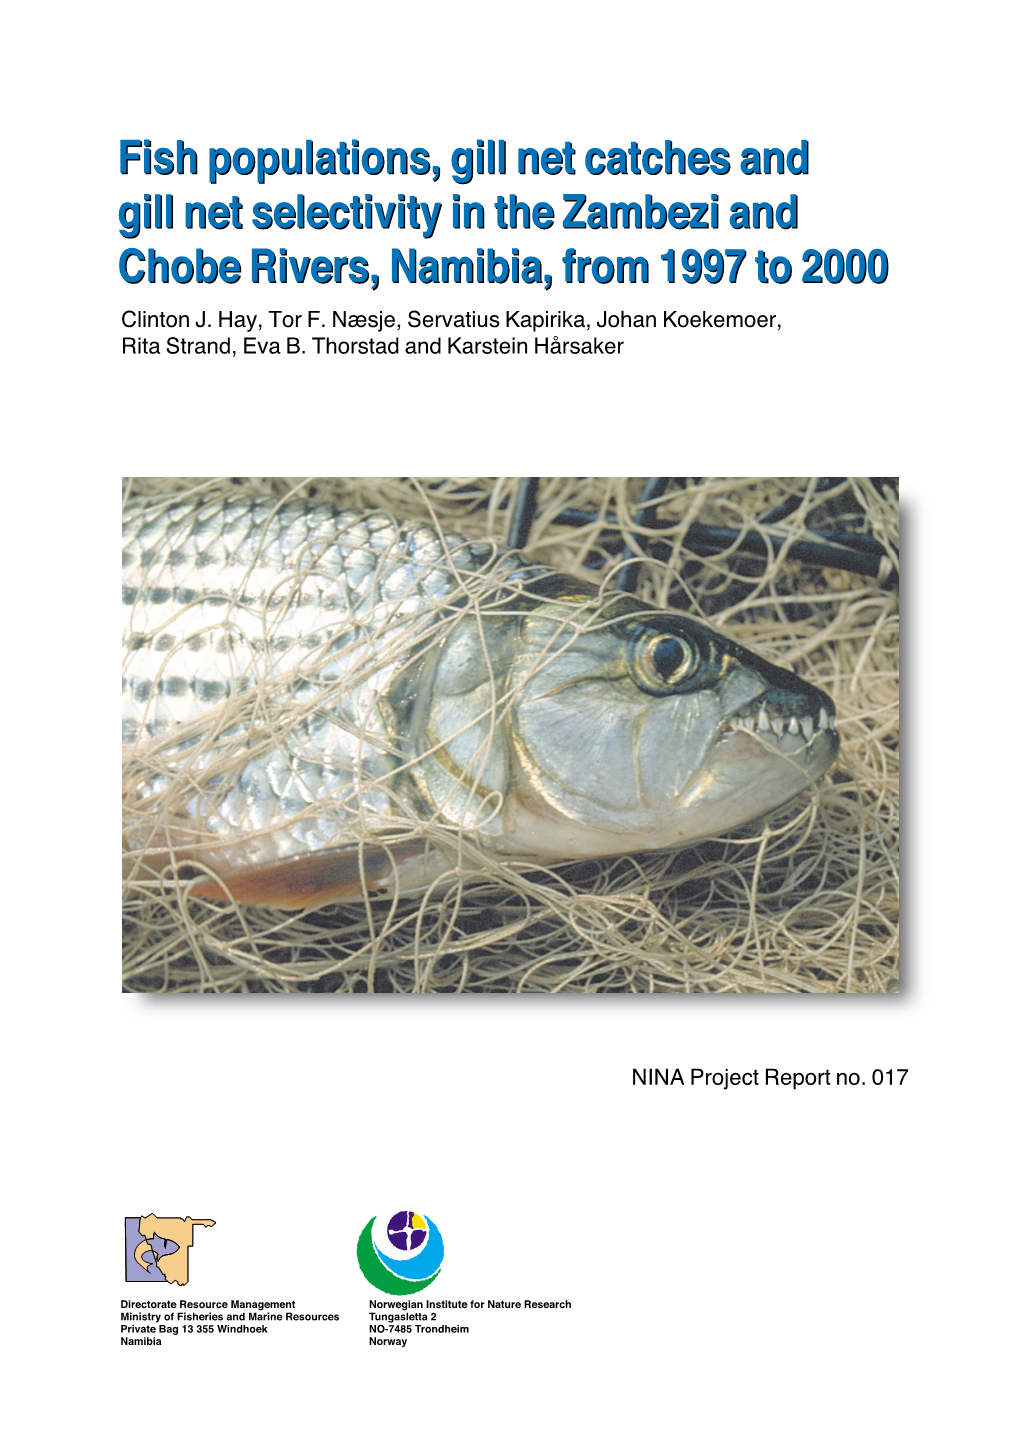 Fish Populations, Gill Net Catches and Gill Net Selectivity in the Zambezi and Chobe Rivers, Namibia, from 1997 to 2000